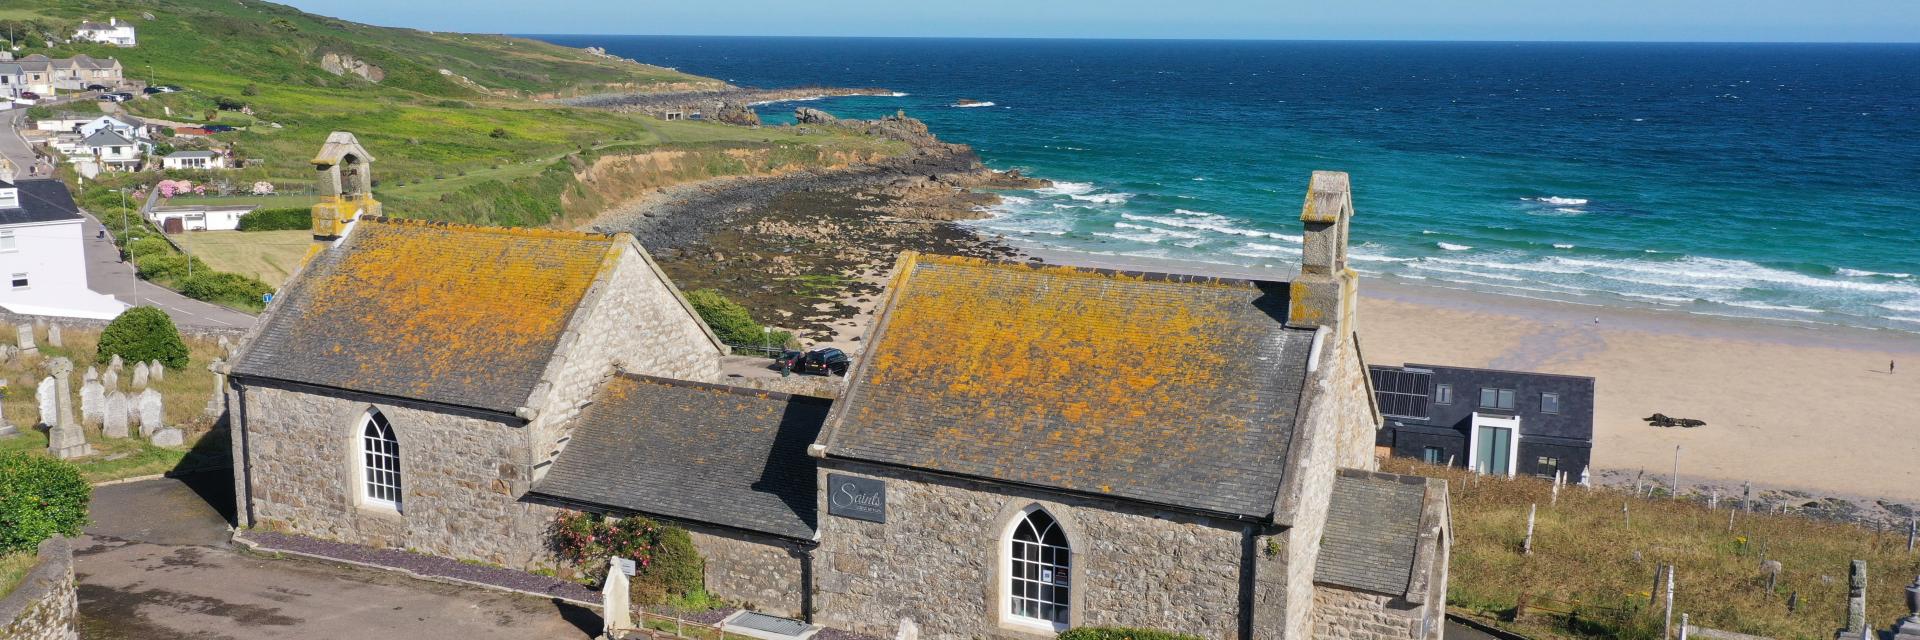 Barnoon Chapel at Porthmeor beach in St Ives